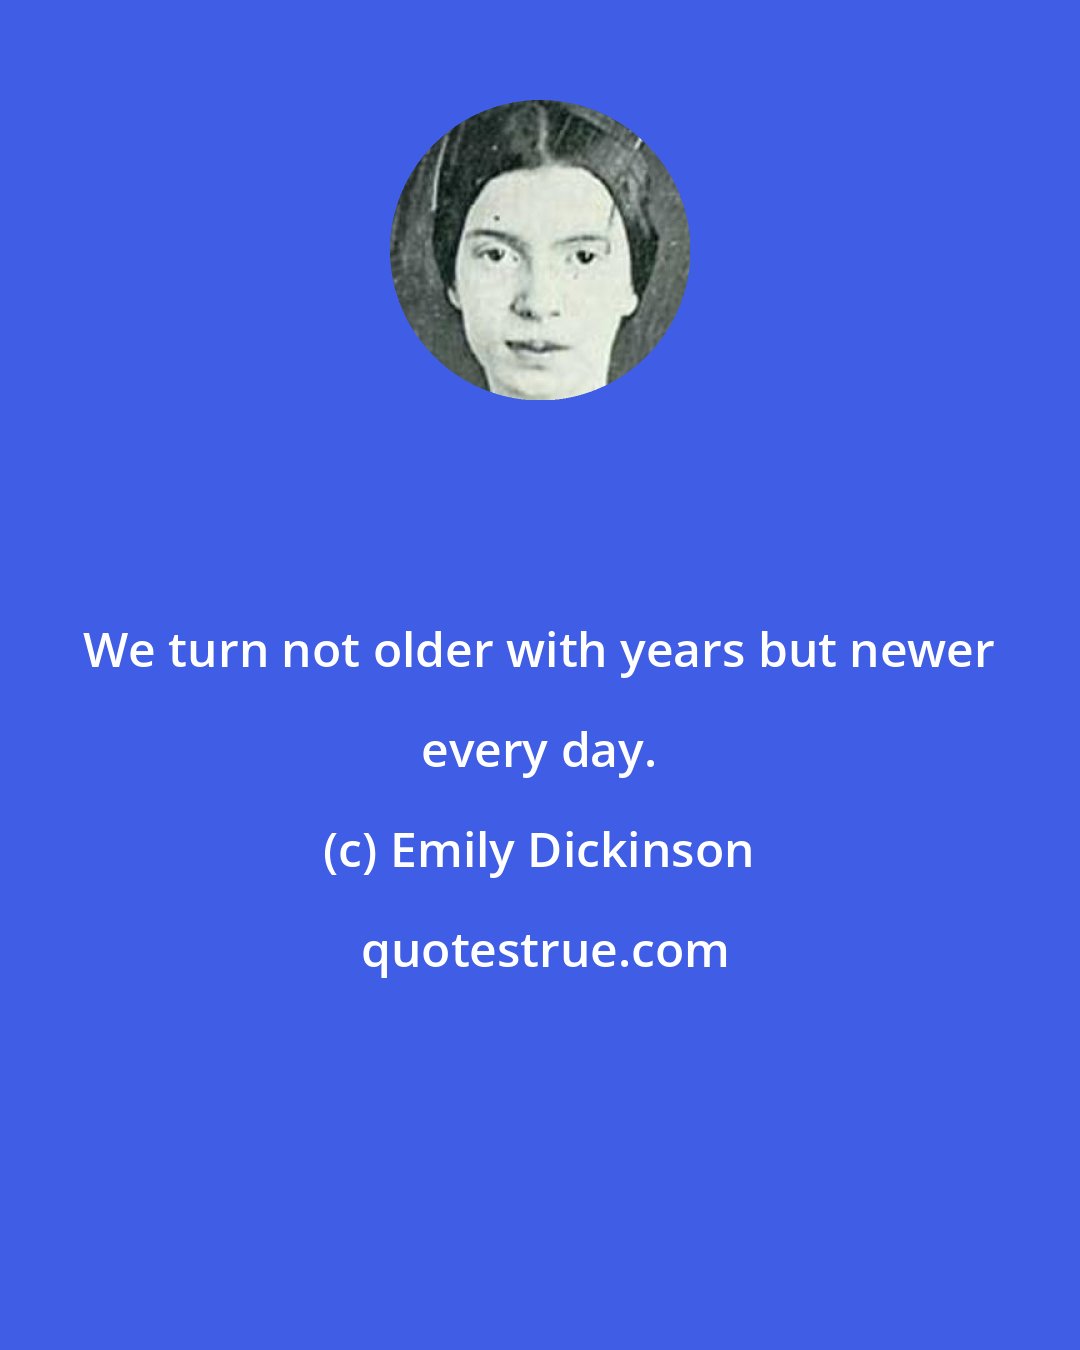 Emily Dickinson: We turn not older with years but newer every day.